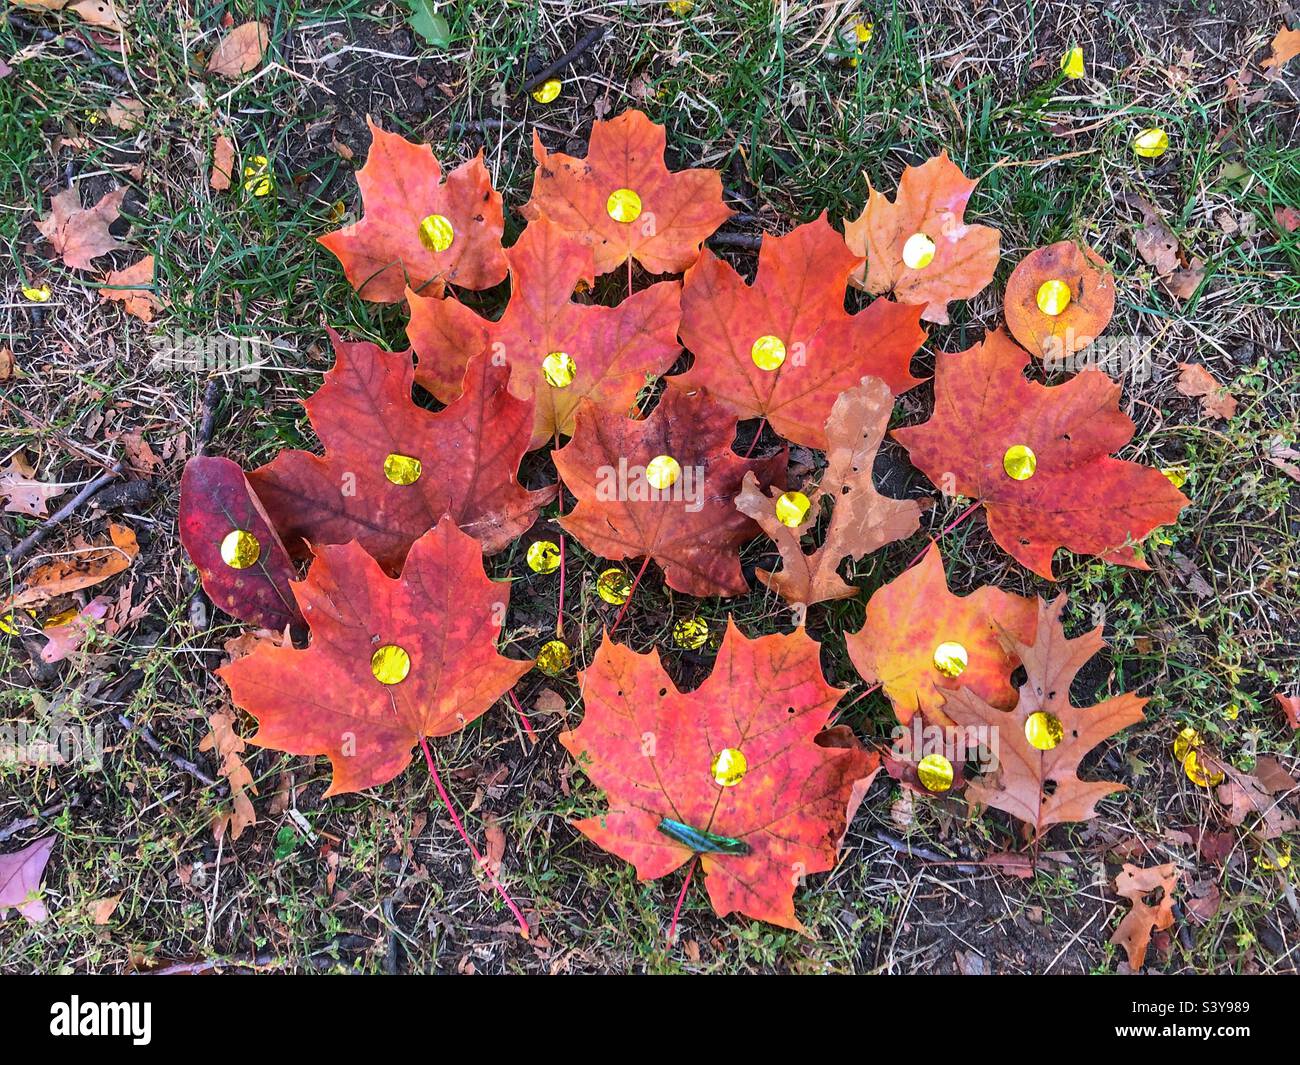 A cluster of autumn leaves on the ground. Stock Photo